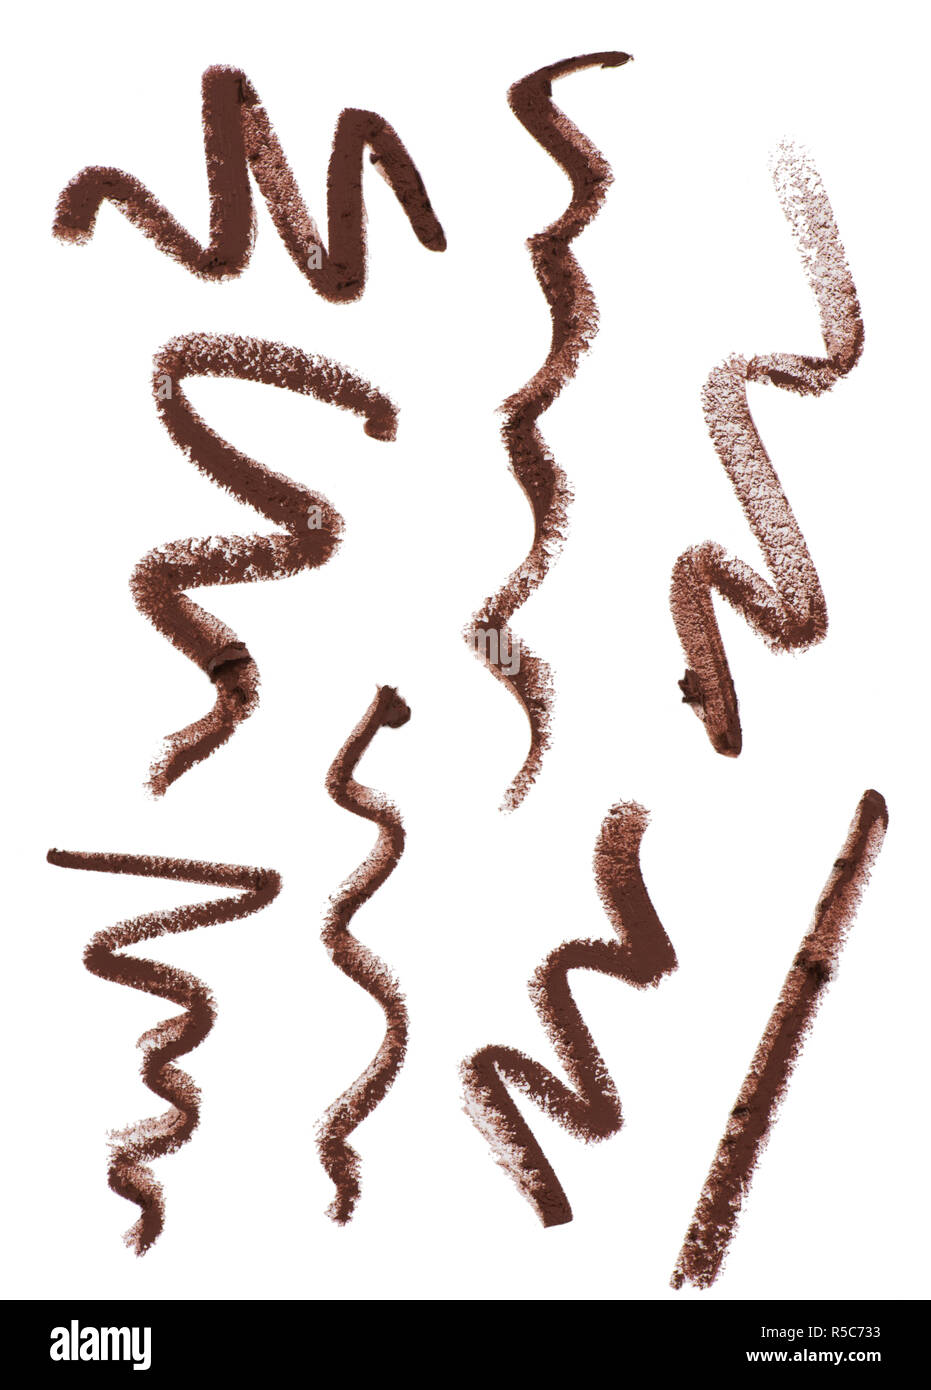 A still life cut out product image of a series of squiggles, lines or zig zags of brown makeup pencil on a white background Stock Photo